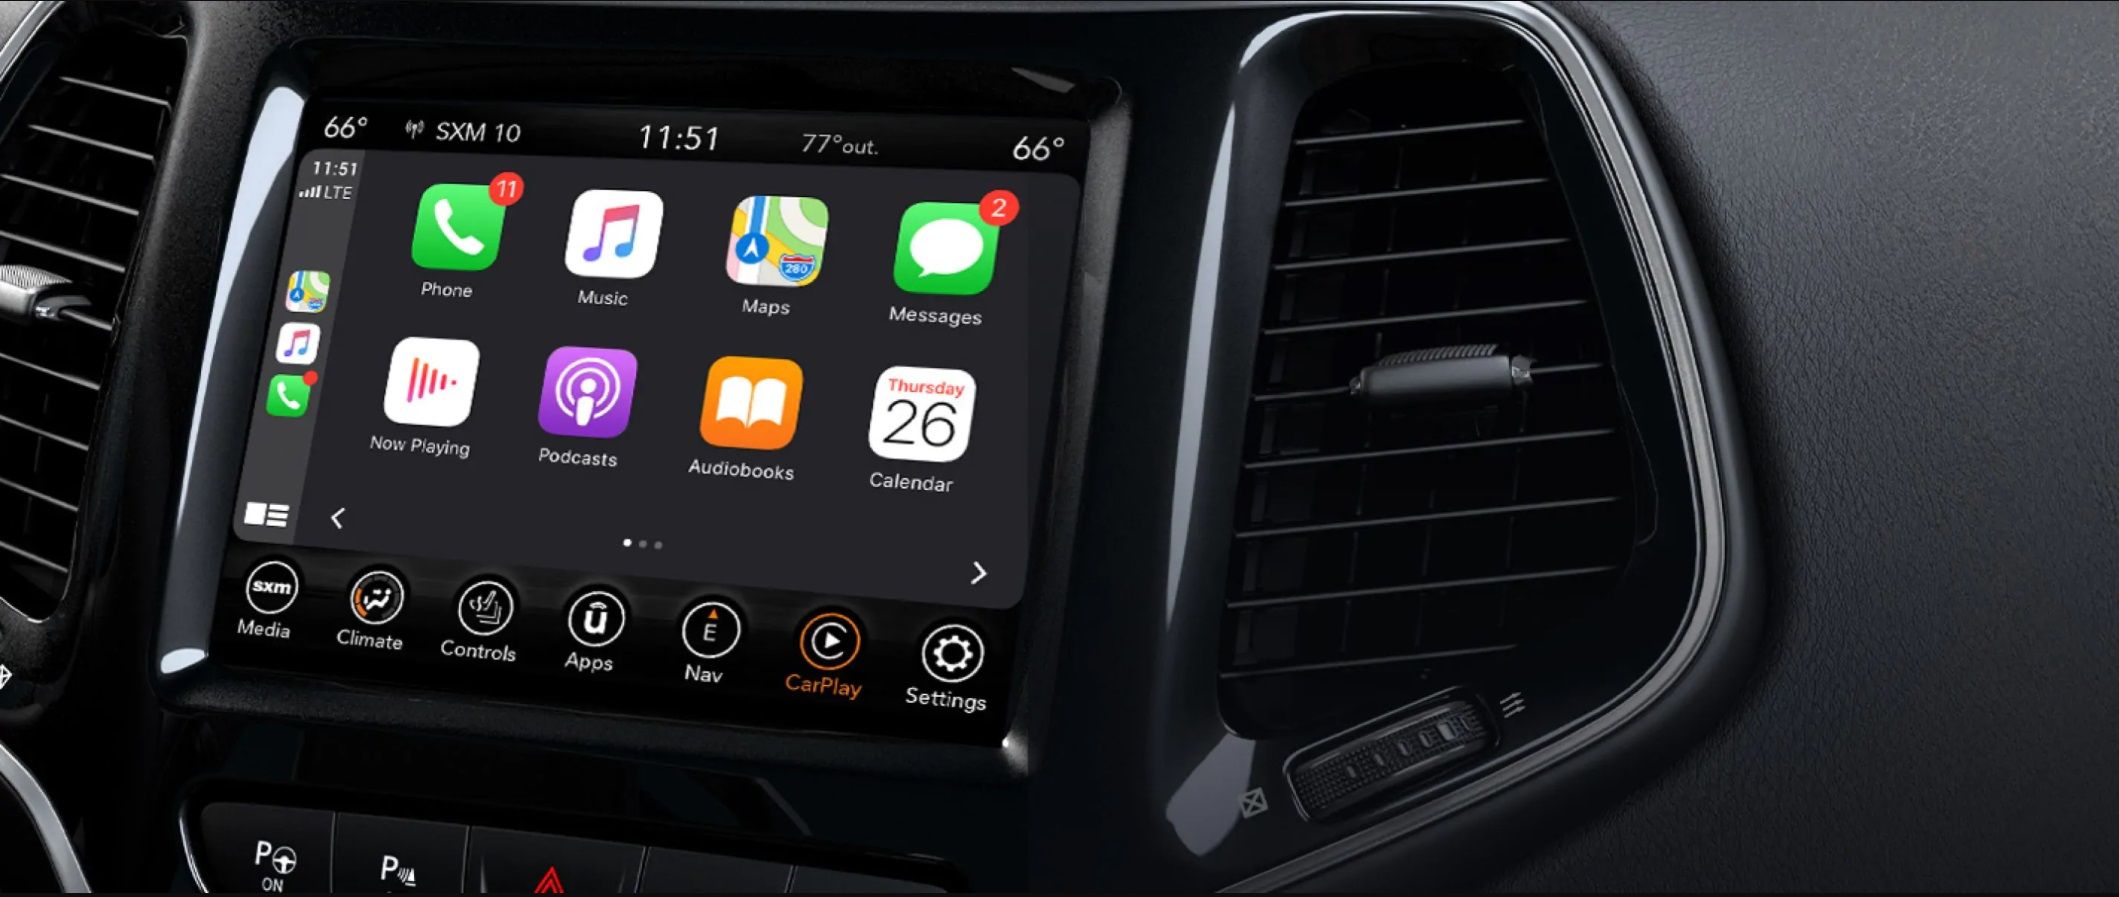 The 2021 Jeep Cherokee Touchscreen.